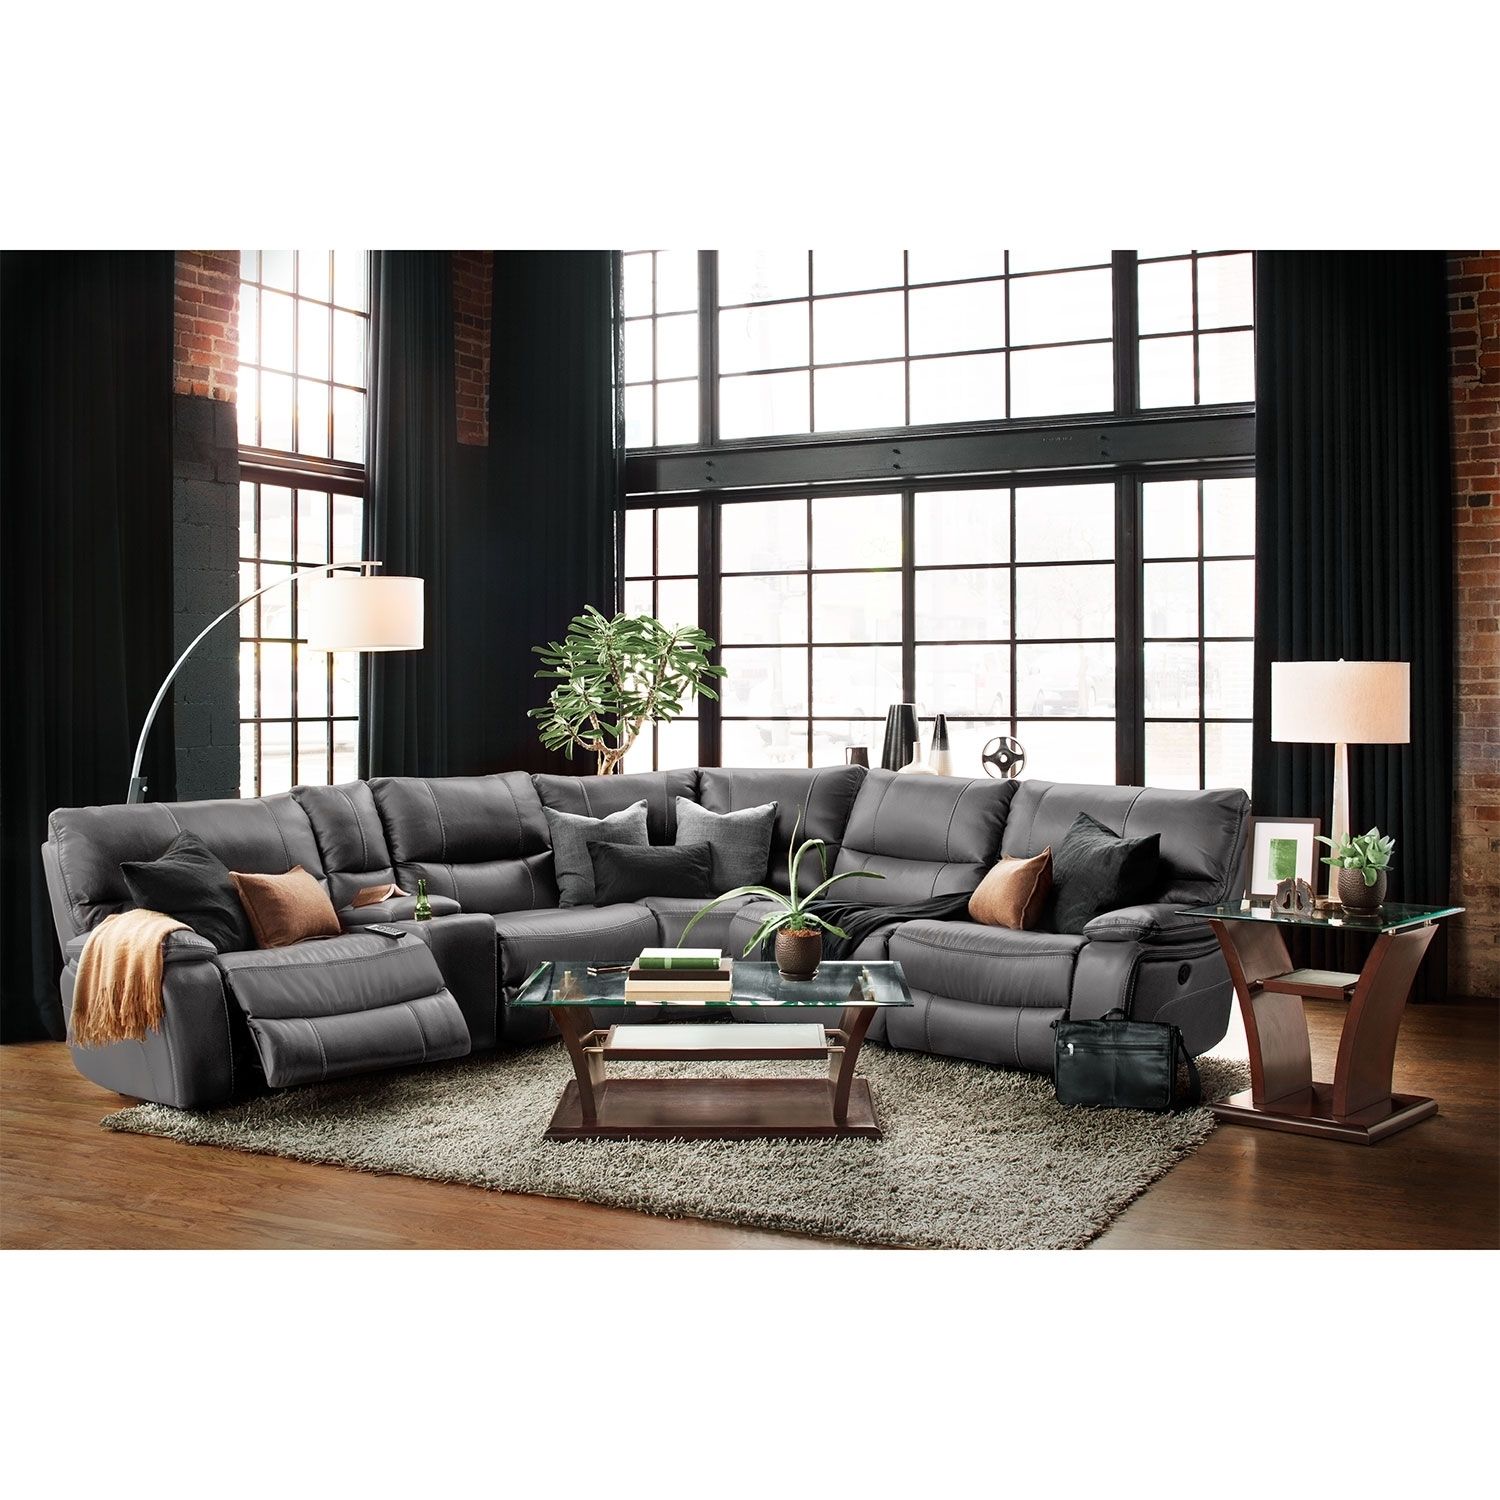 3 Pc Mccaskill Collection Gray Leather Match Upholstered Sectional In Economax Sectional Sofas (View 10 of 10)